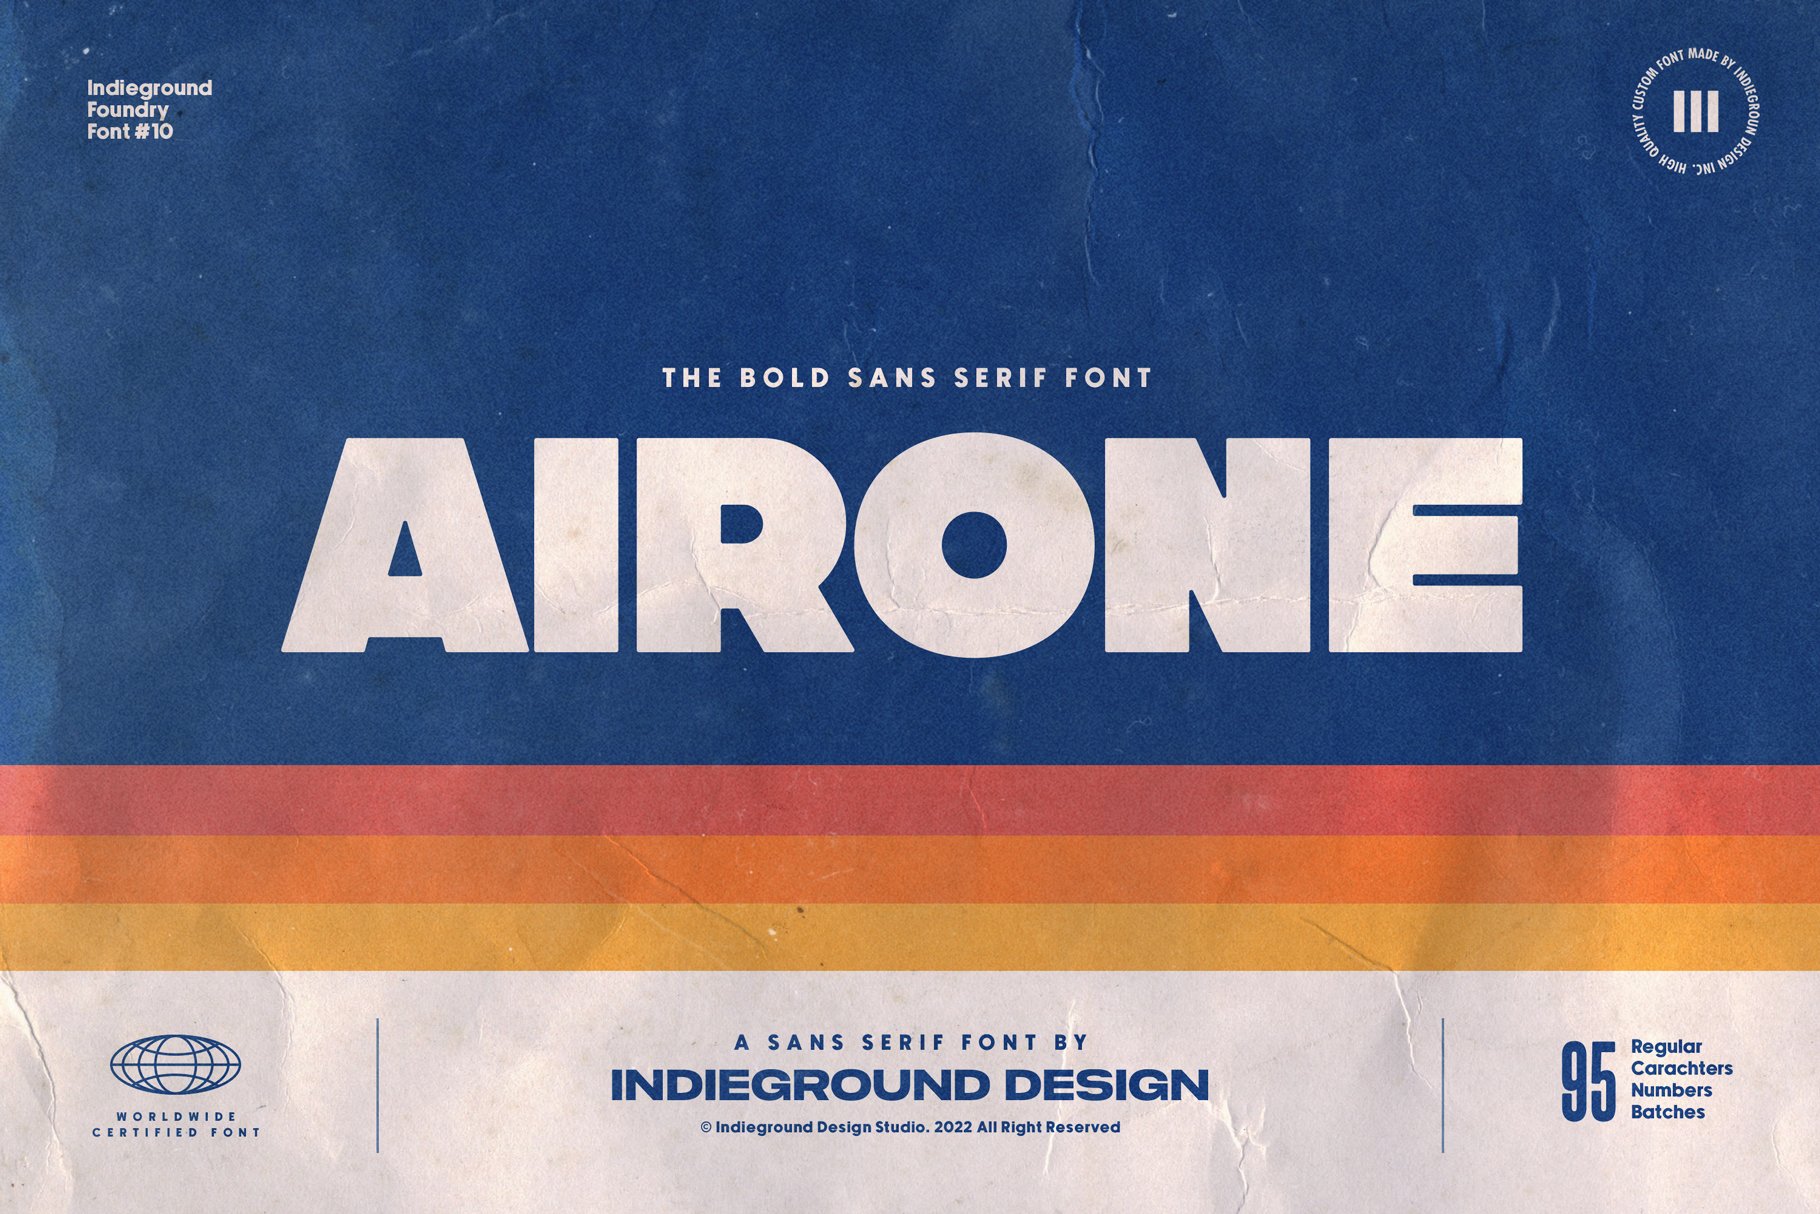 Airone Font cover image.